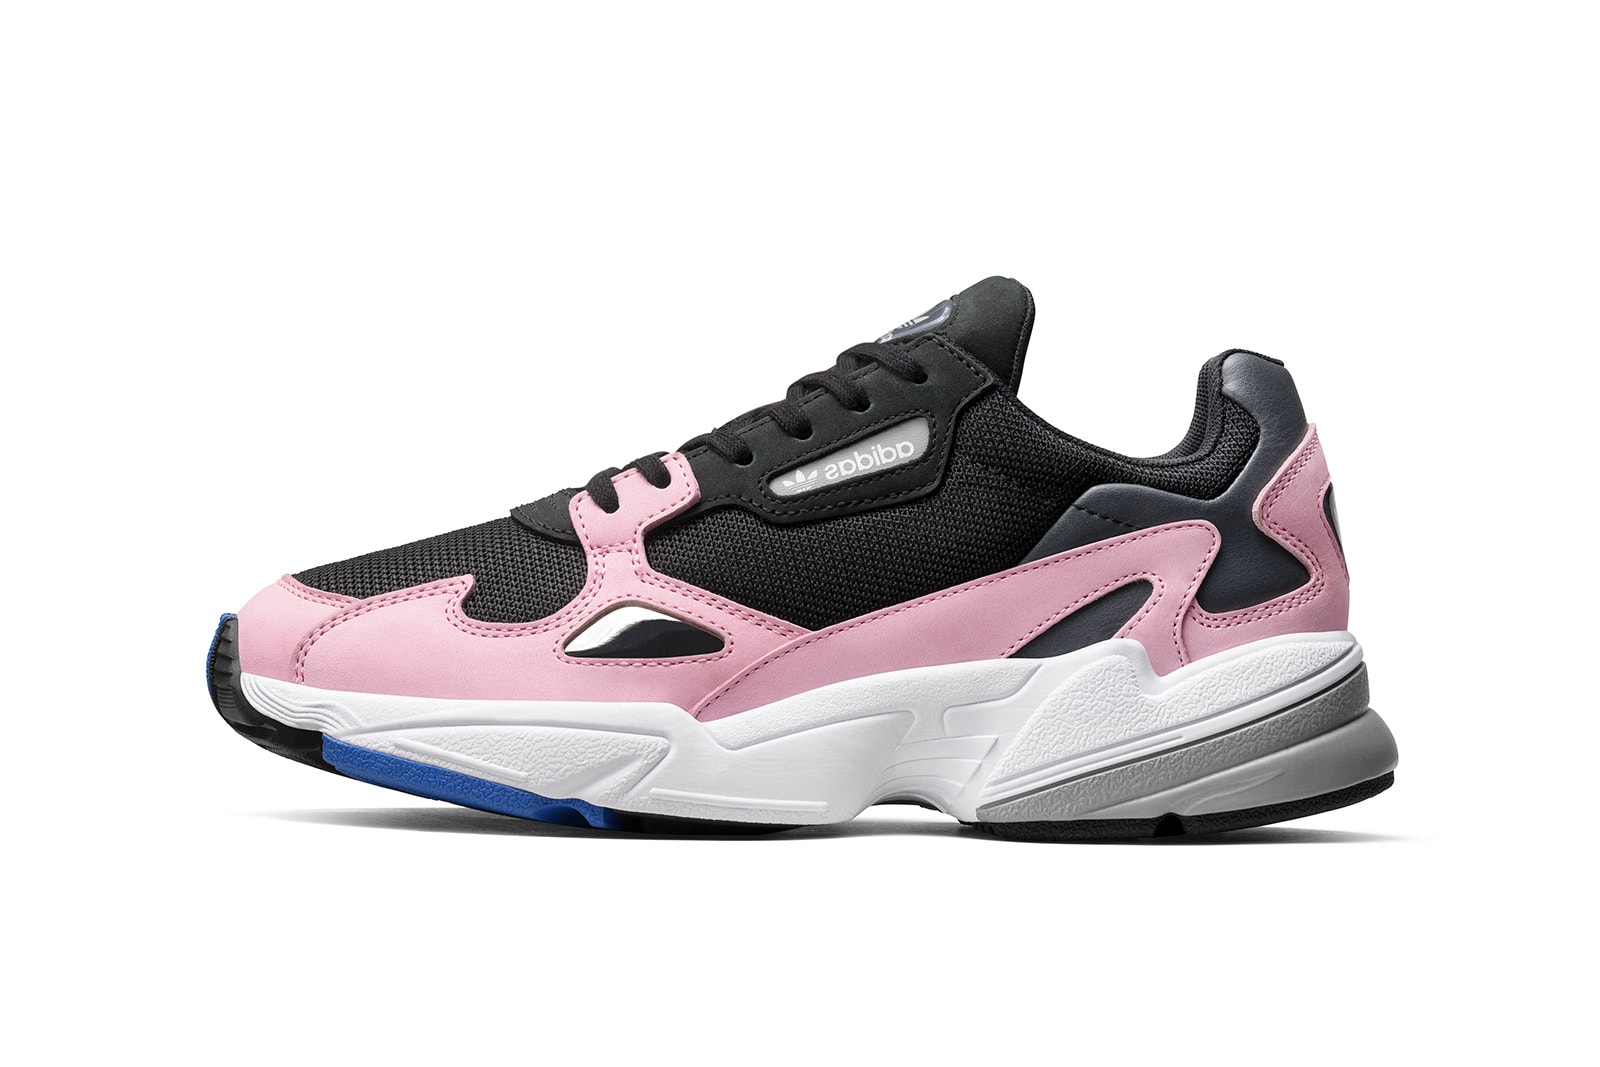 Adidas Falcon Black and Pink Kylie Jenner Shoes